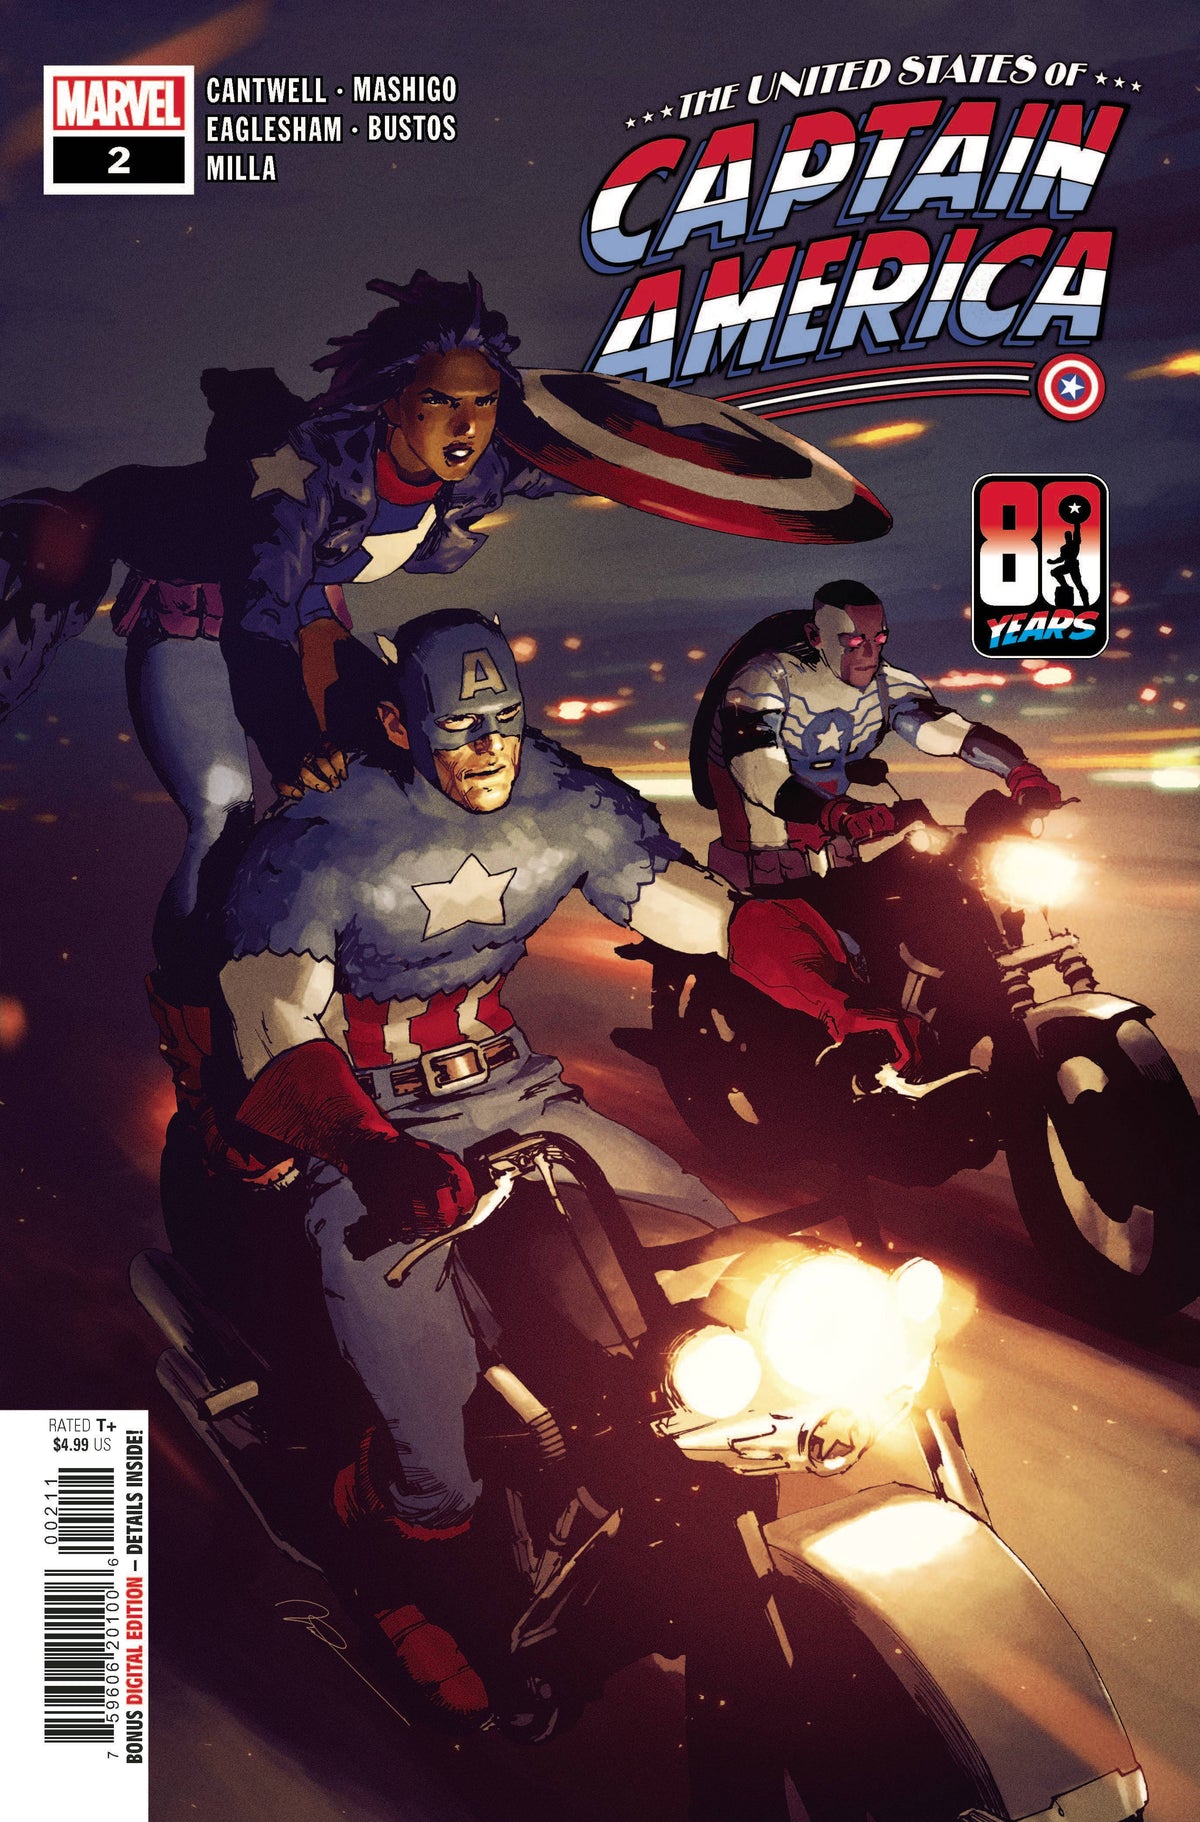 United States Captain America #2 (Of 5) - State of Comics